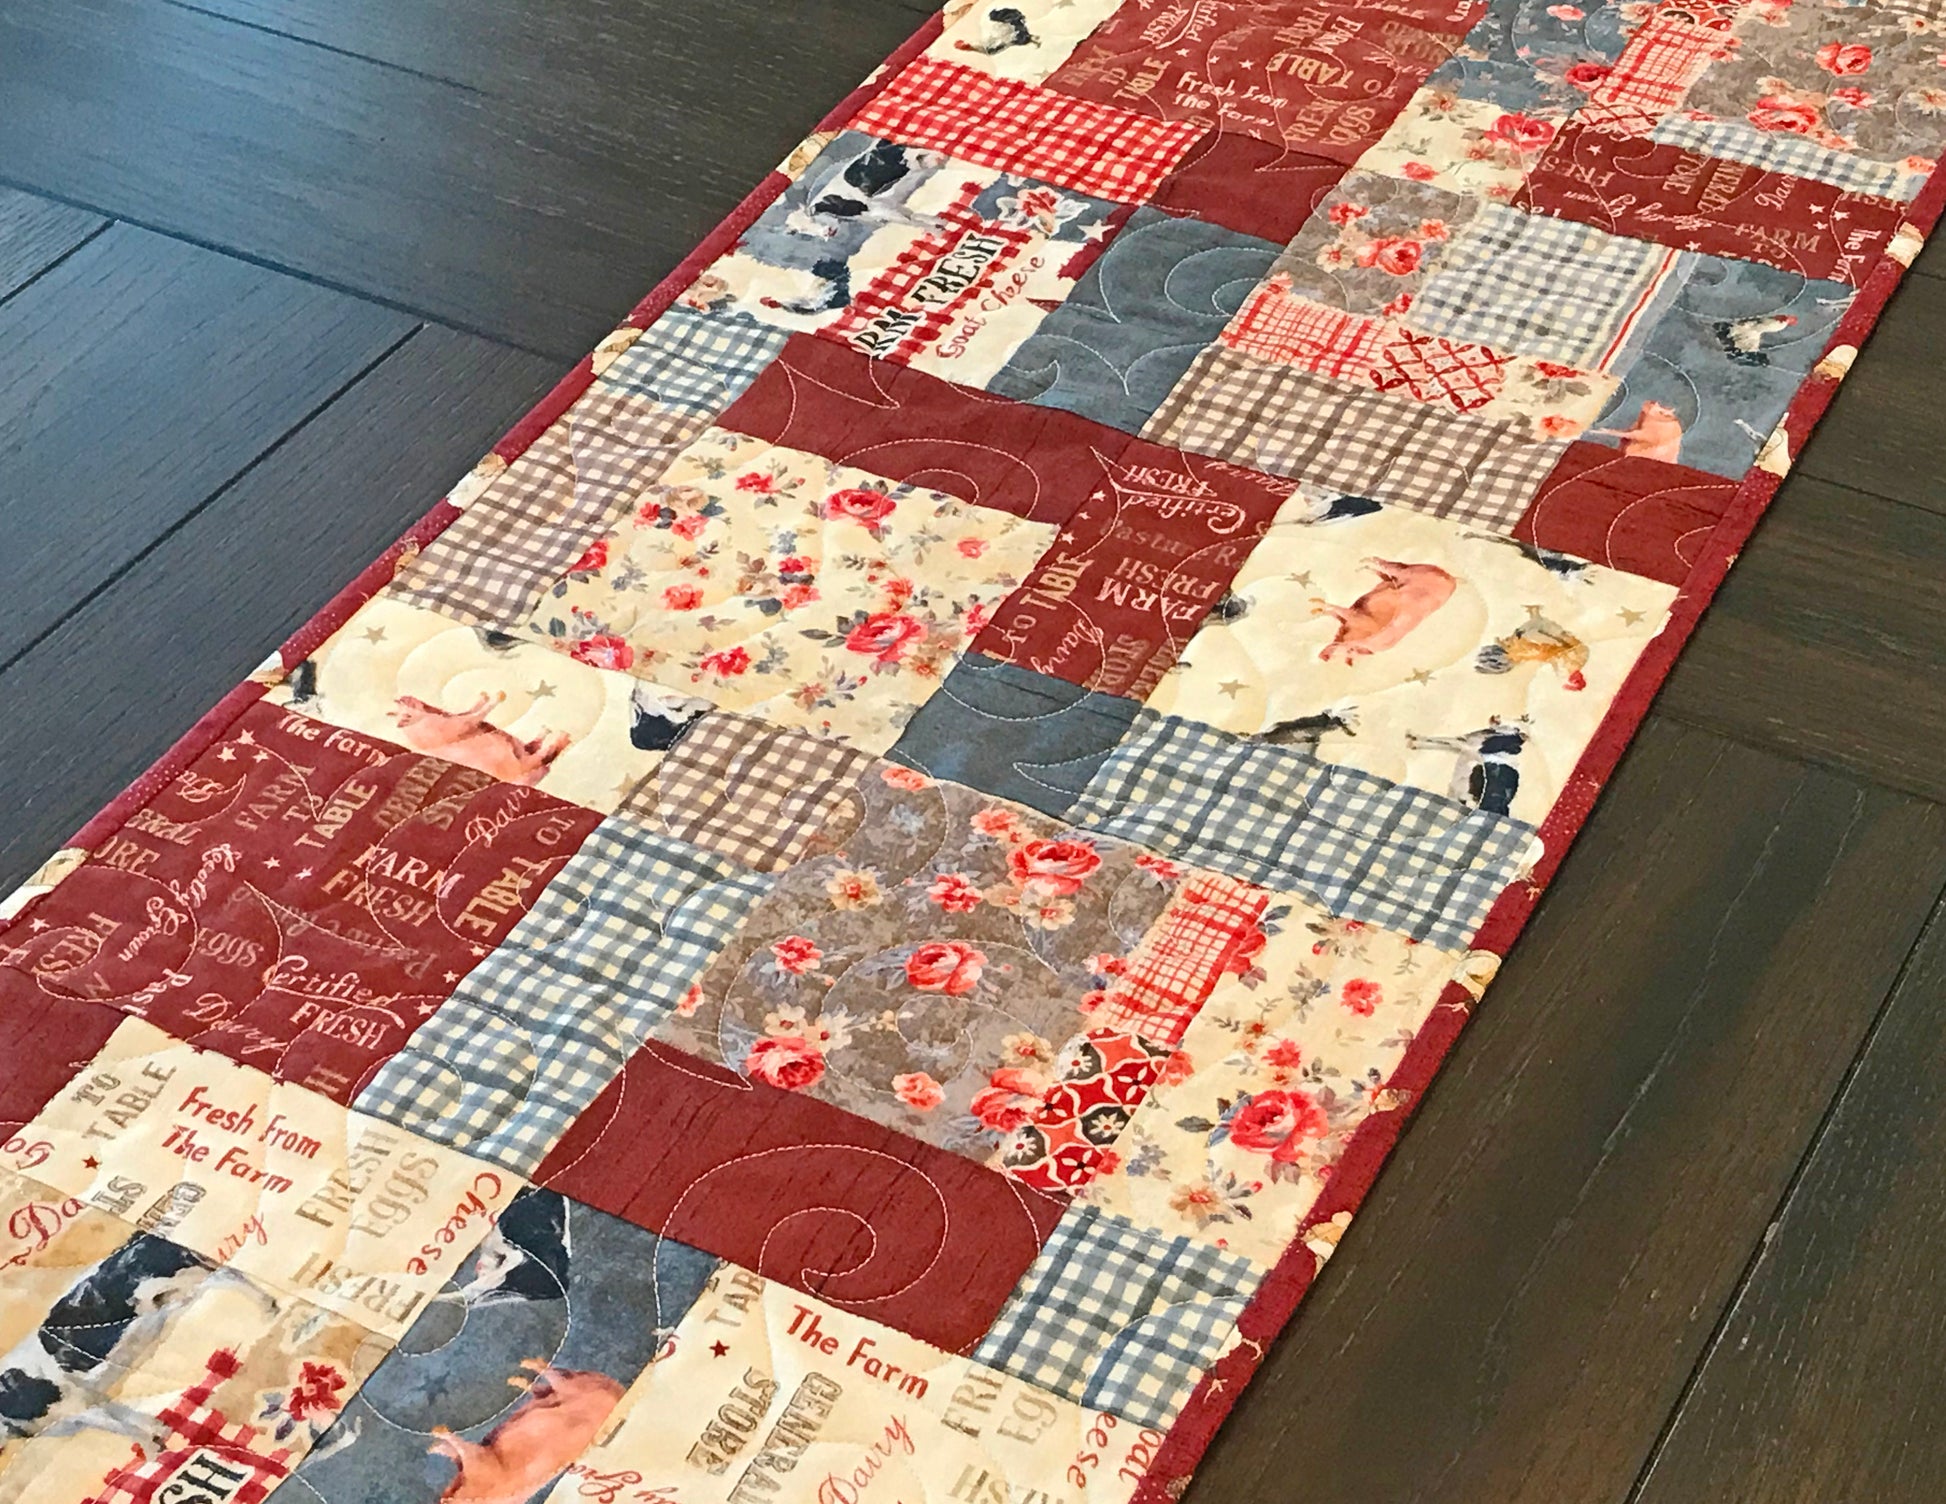 Charmingly Simple Table Runner and Table Topper Pattern for Charm Squares - Digital Pattern - Handmade Quilts, Digital Patterns, and Home Décor items online - Cuddle Cat Quiltworks